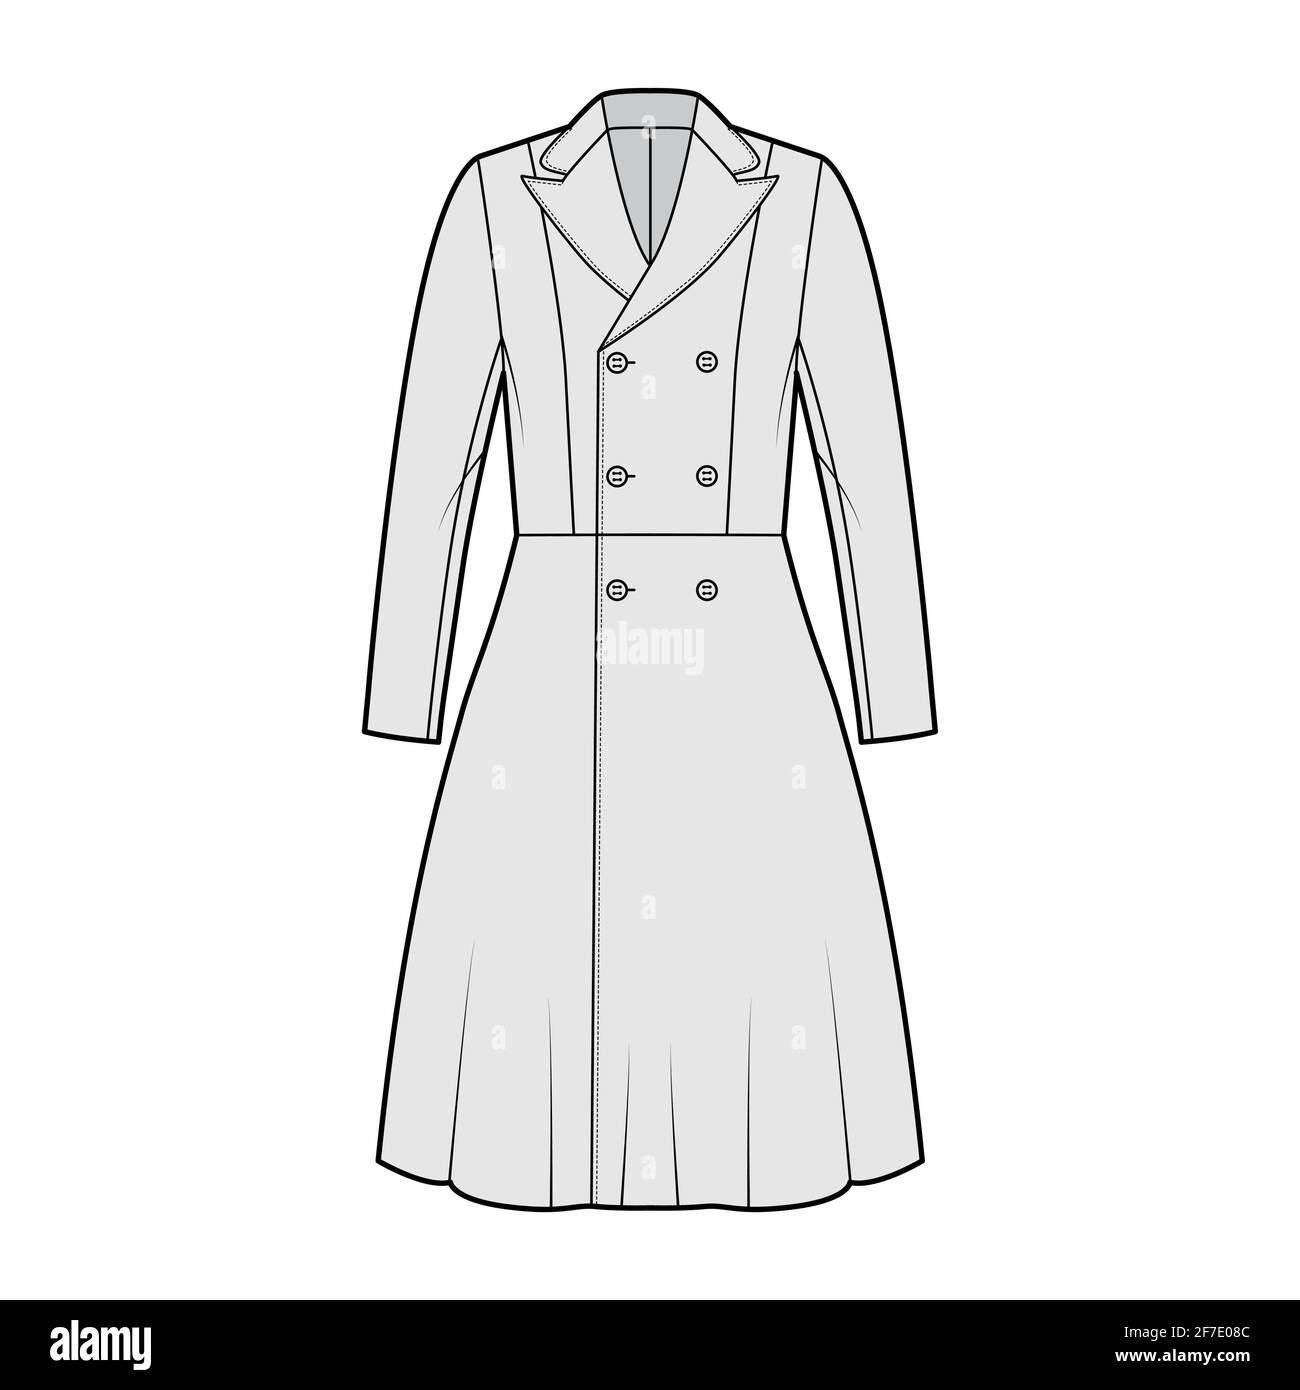 Redingote coat technical fashion illustration with double breasted, fitted, long sleeves, peak lapel collar, knee length. Flat jacket template front, grey color style. Women, men unisex top CAD mockup Stock Vector